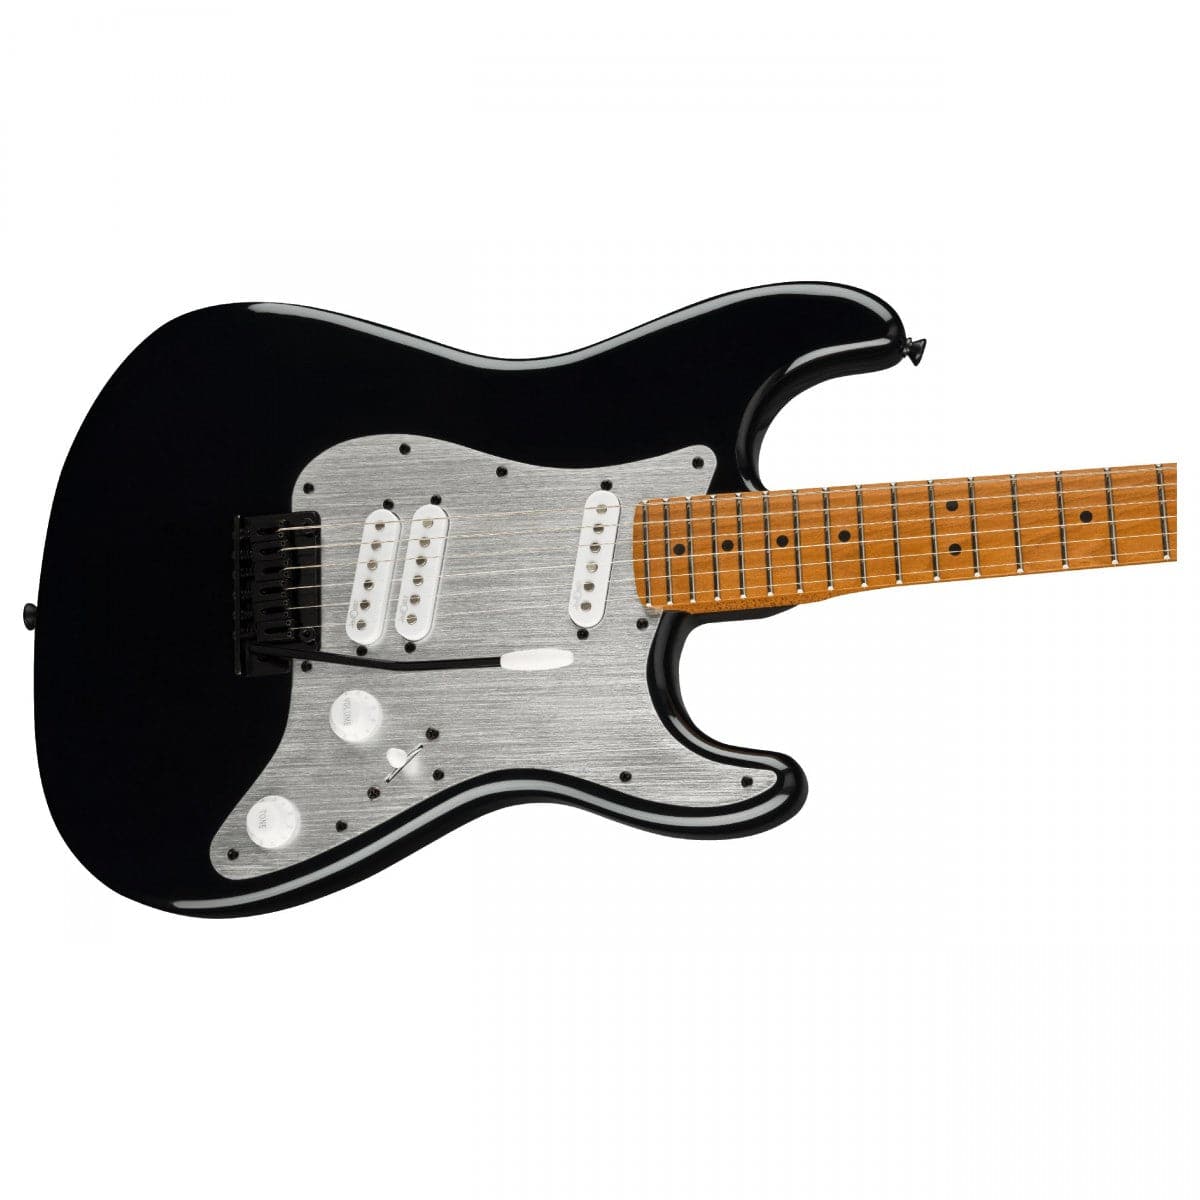 Squier Contemporary Stratocaster Special - Roasted Maple Neck - Black